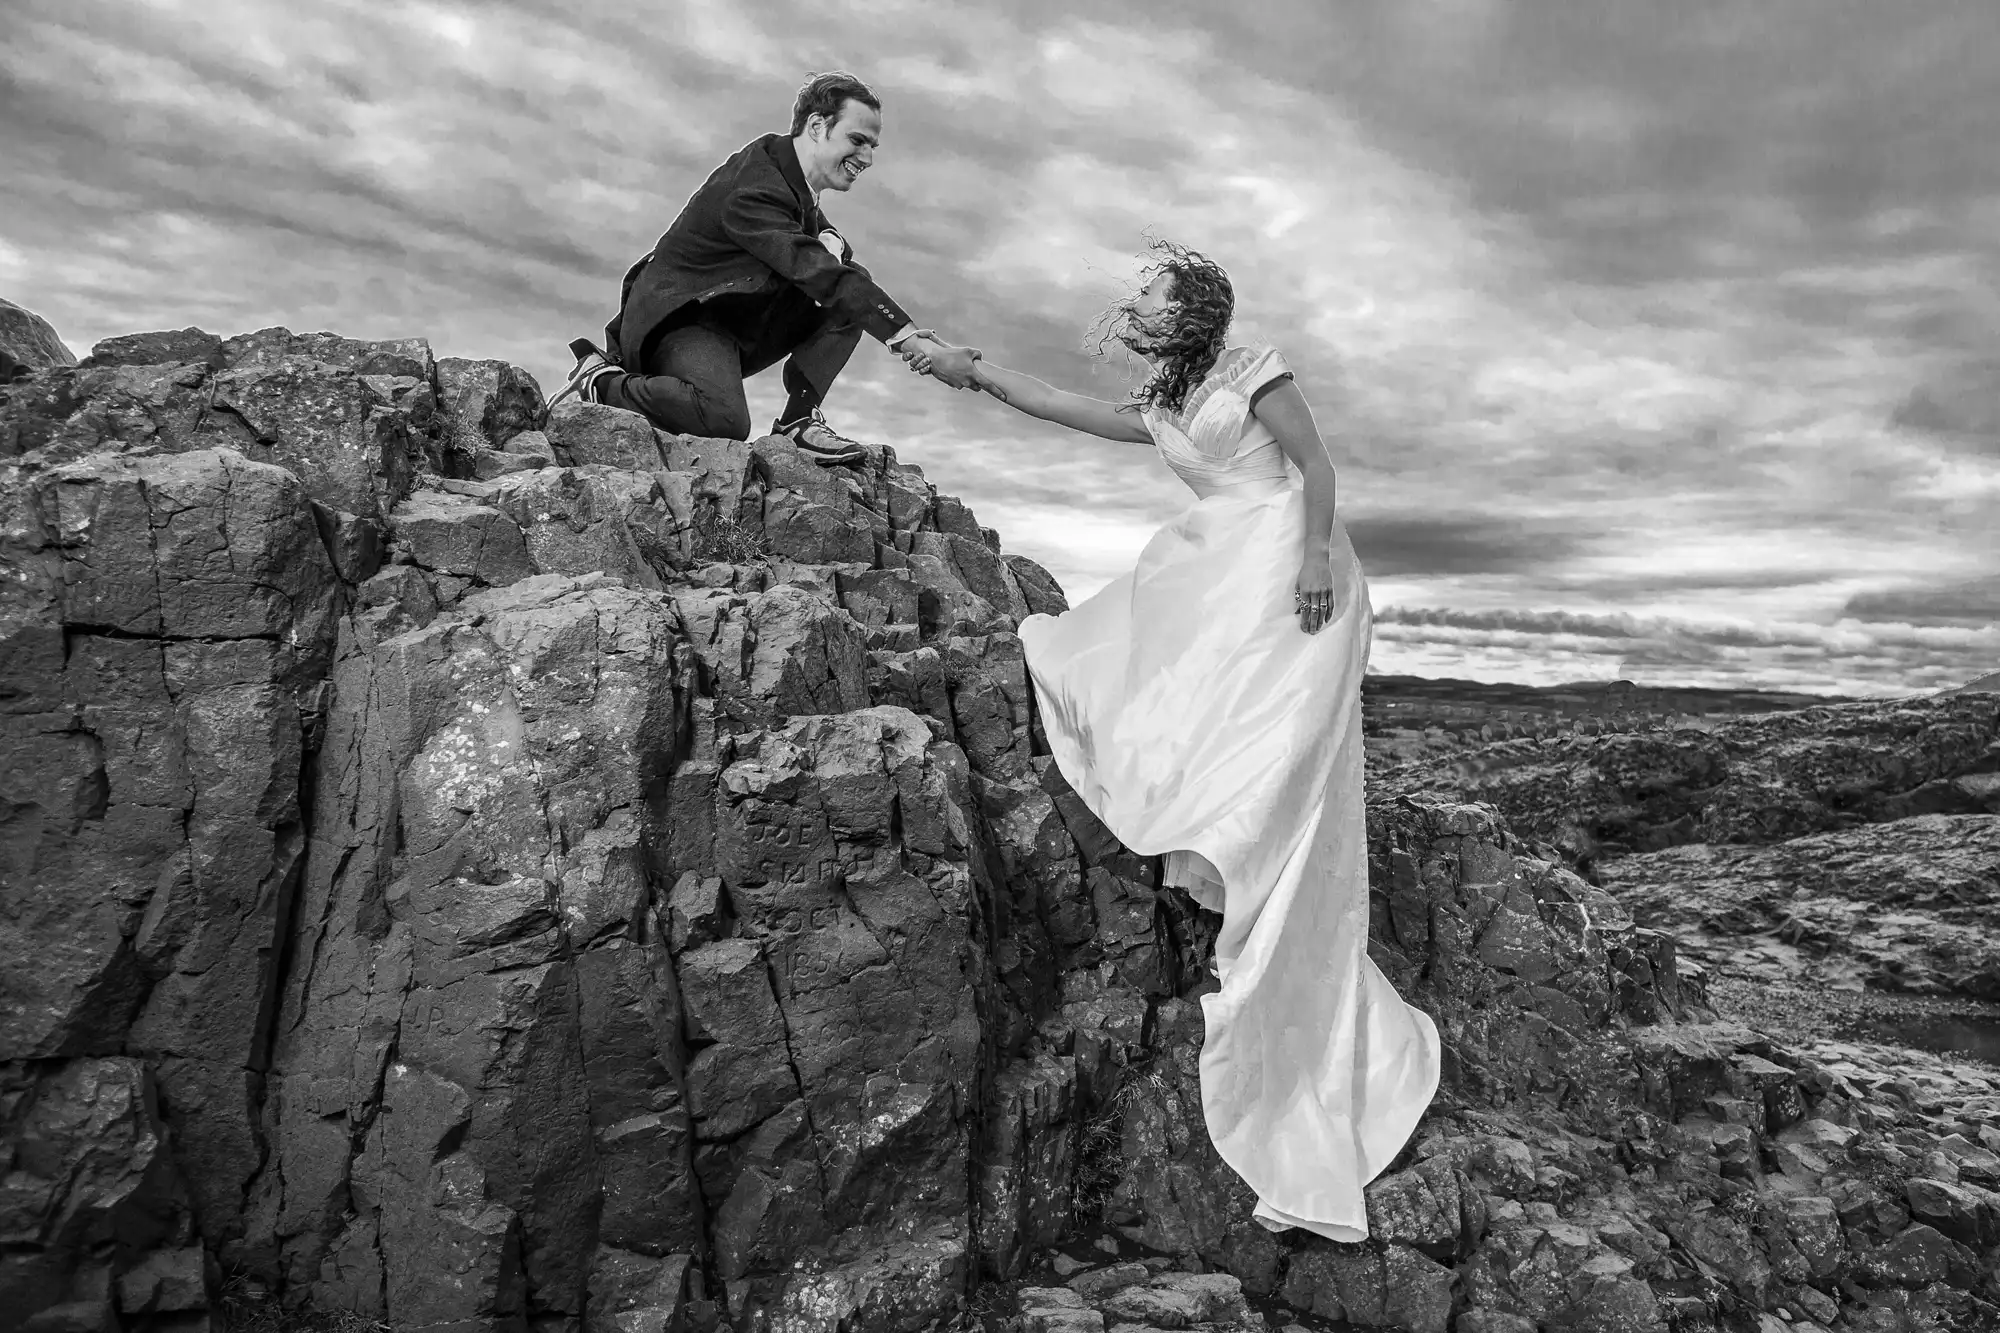 A bride in a white dress and a groom in a suit hold hands on opposite rocky cliffs under a cloudy sky.